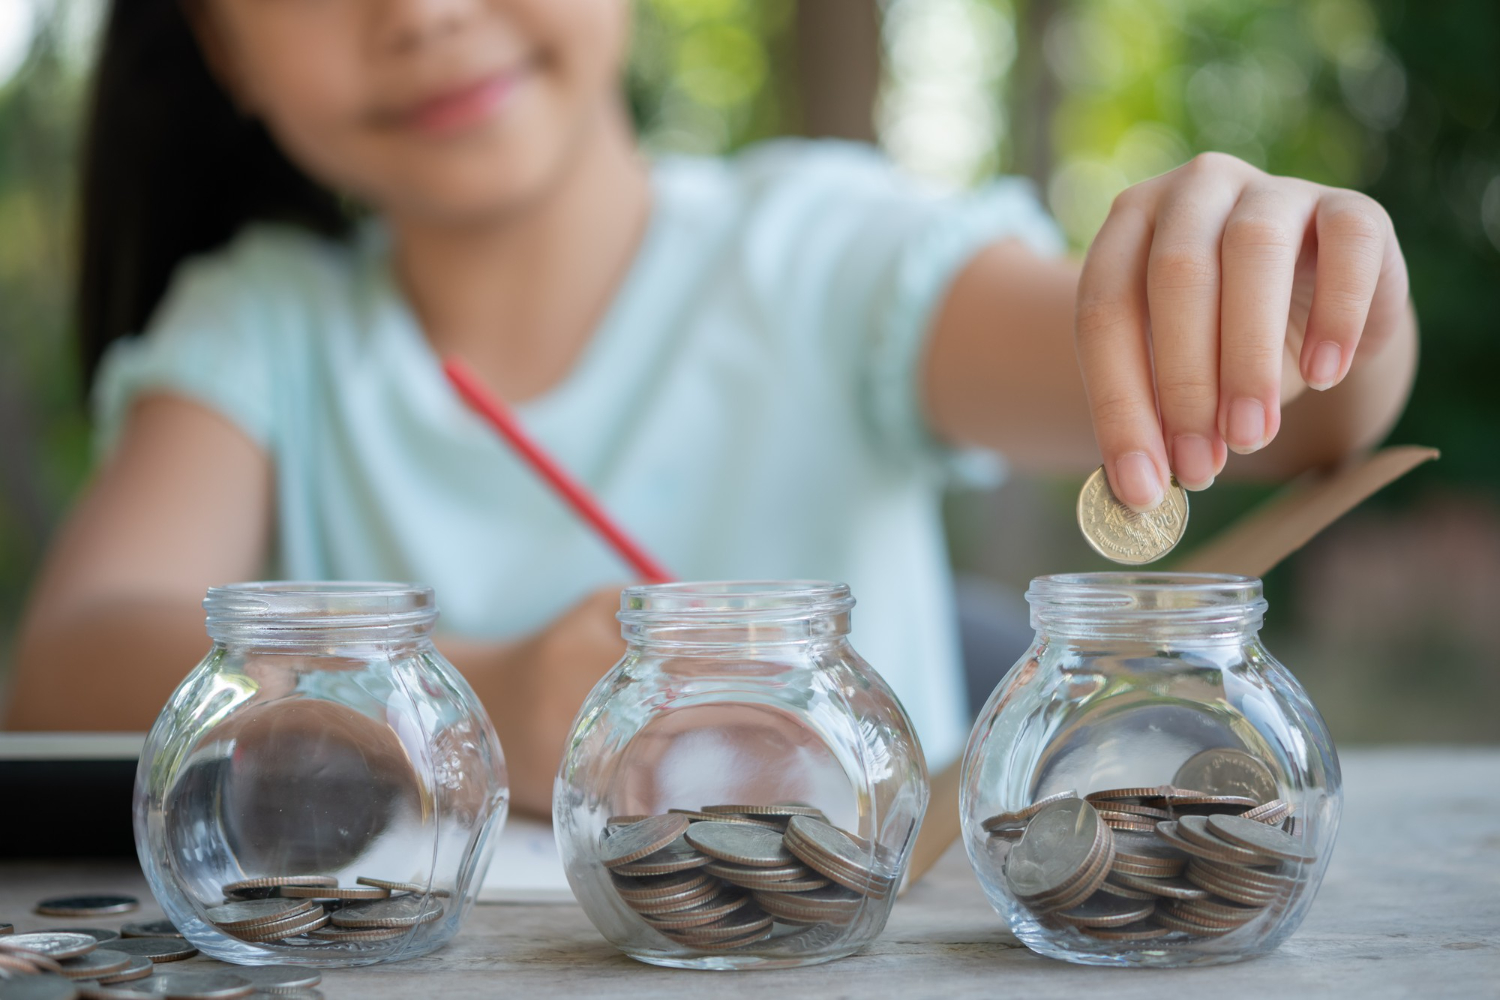 Teaching financial literacy to kids: Importance and strategies